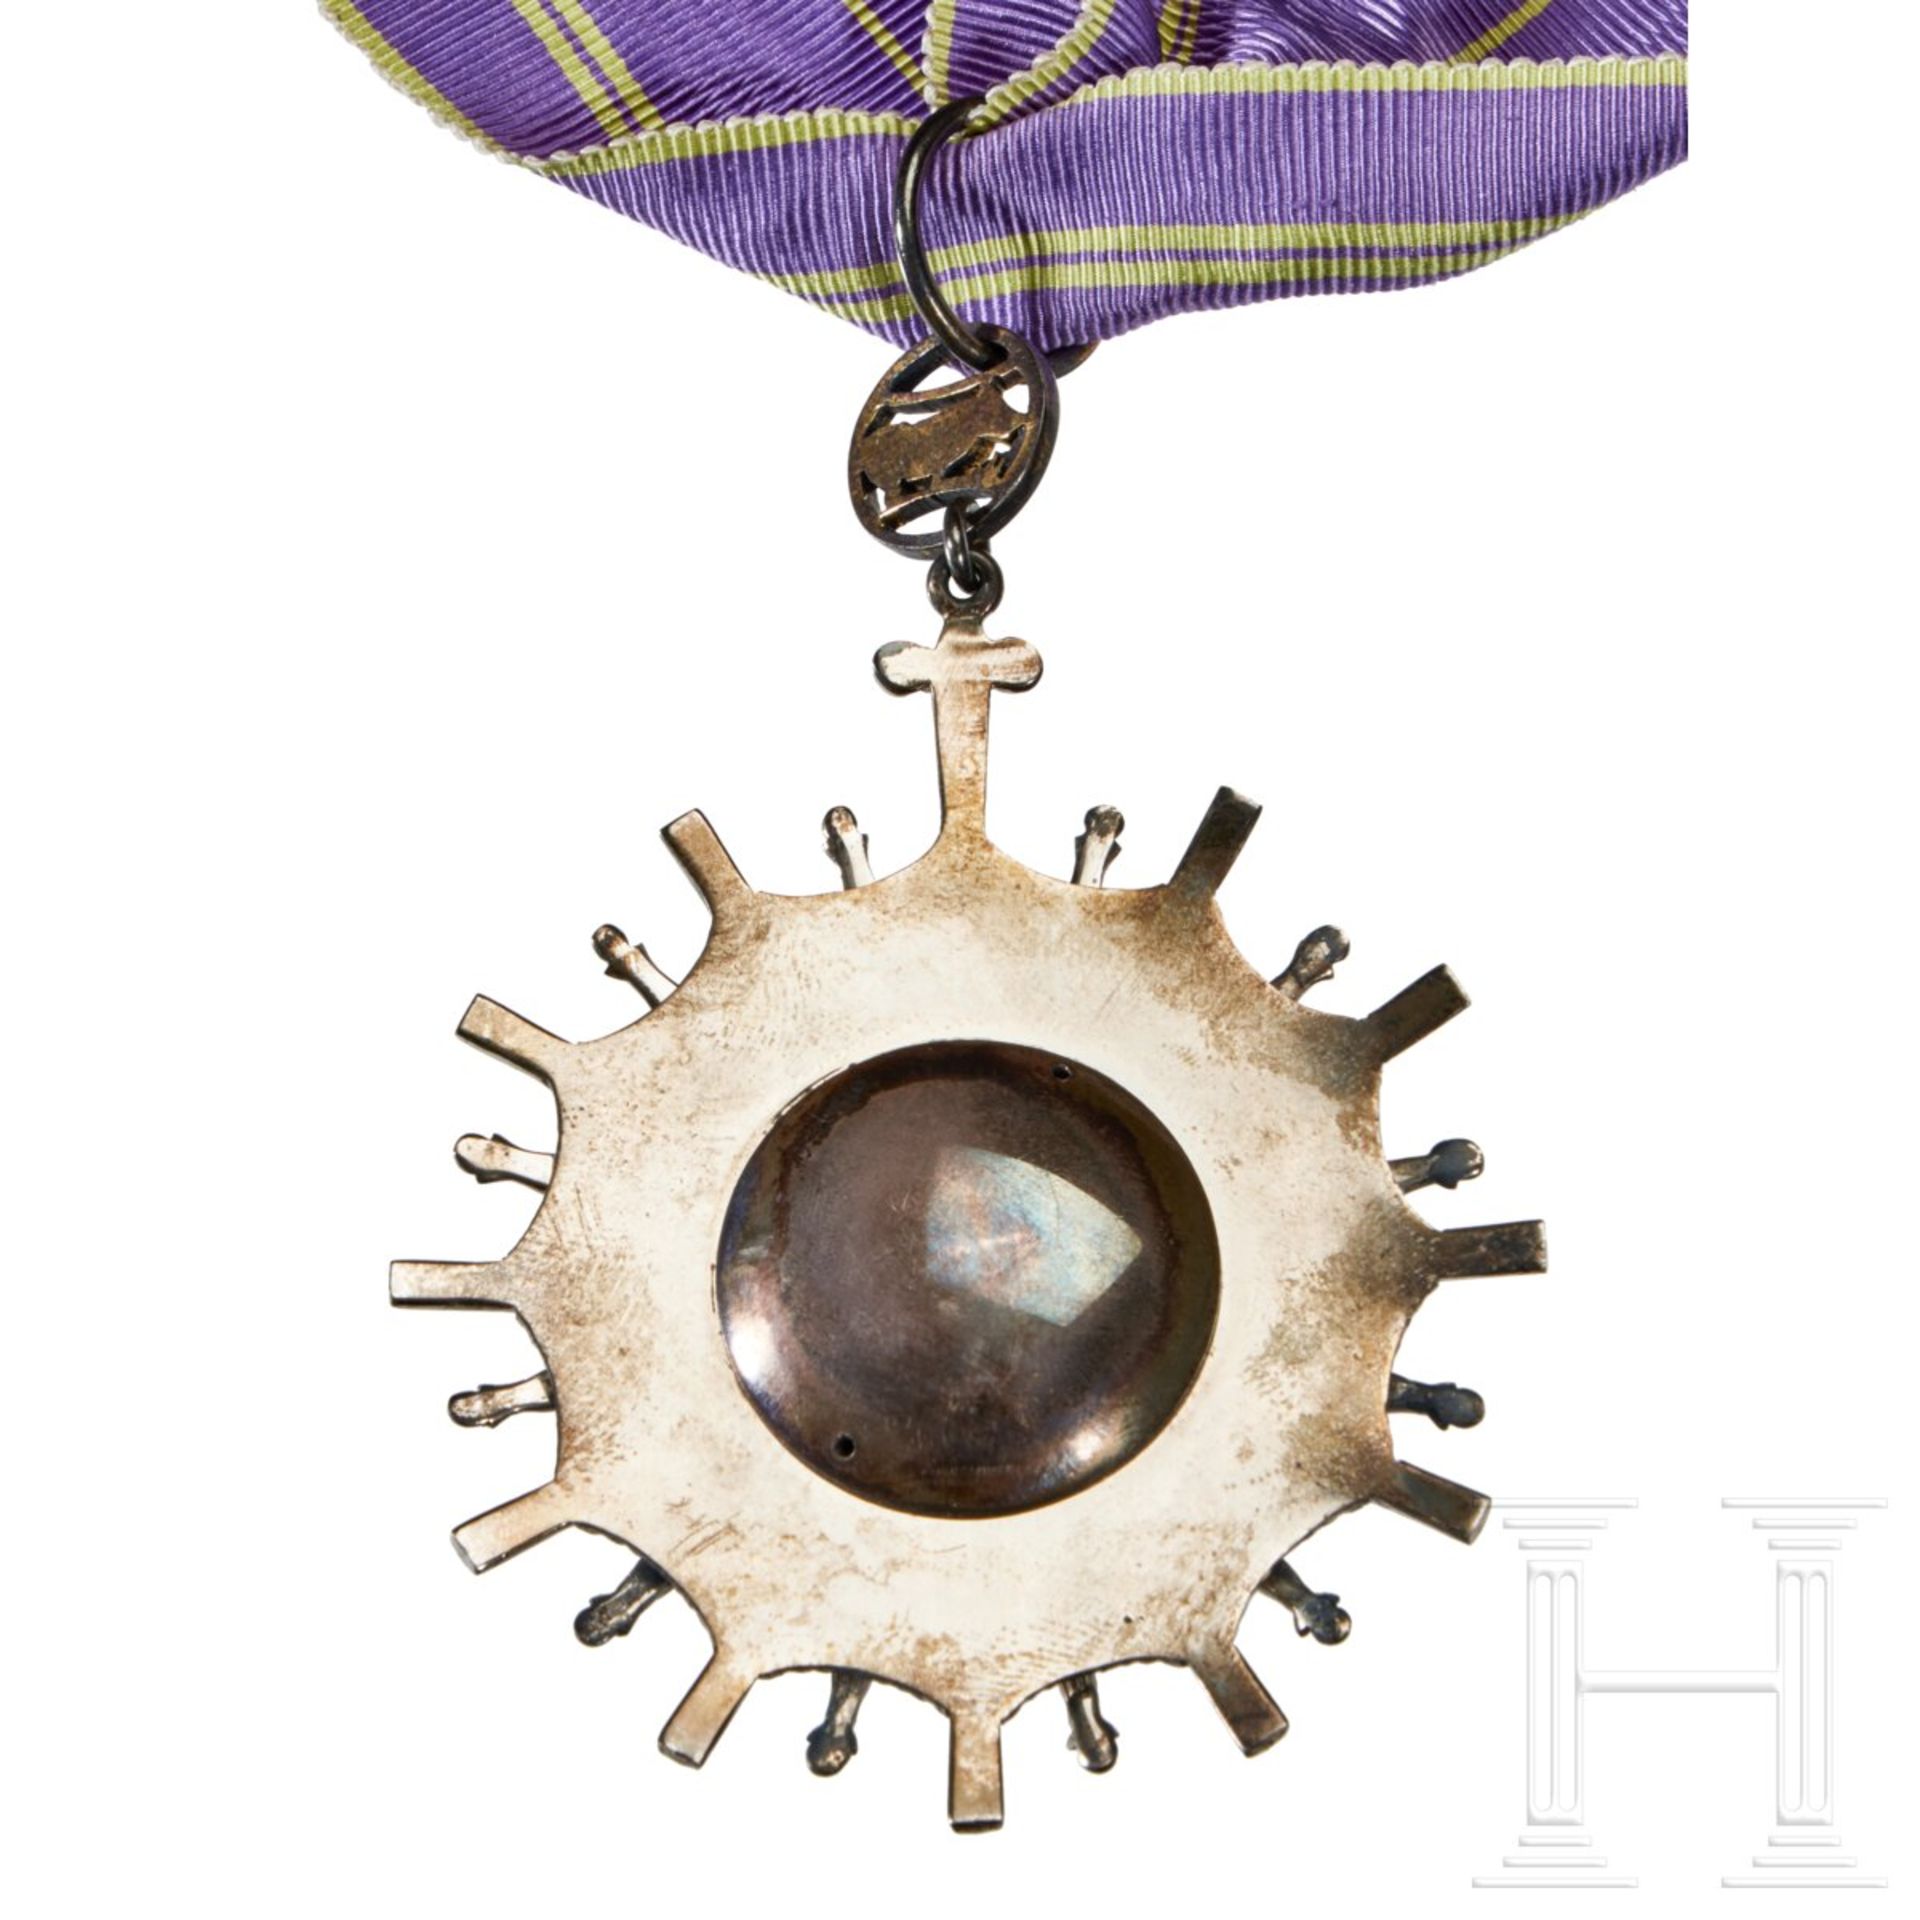 A Sudanese Order of the Republic Grand Cross Type I - Image 4 of 8